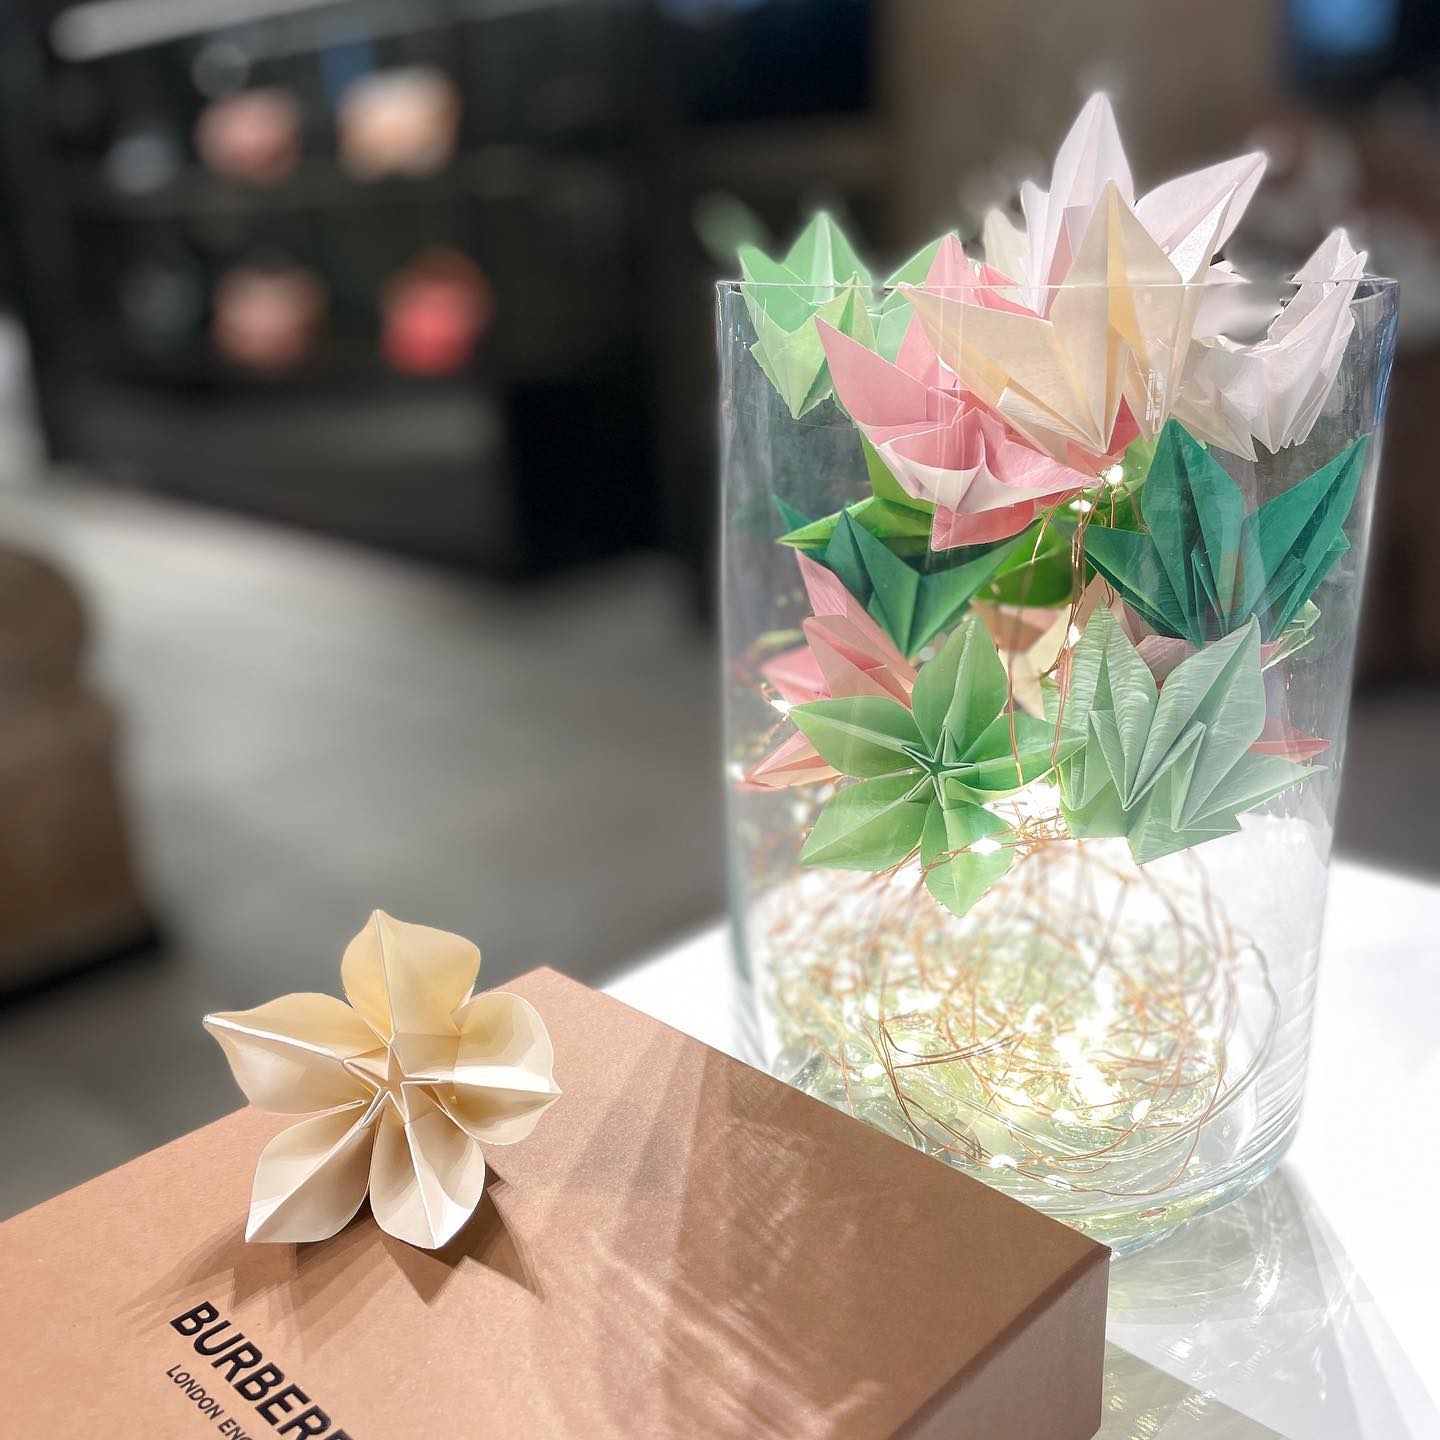 Origami Demonstration at Burberry Sydney